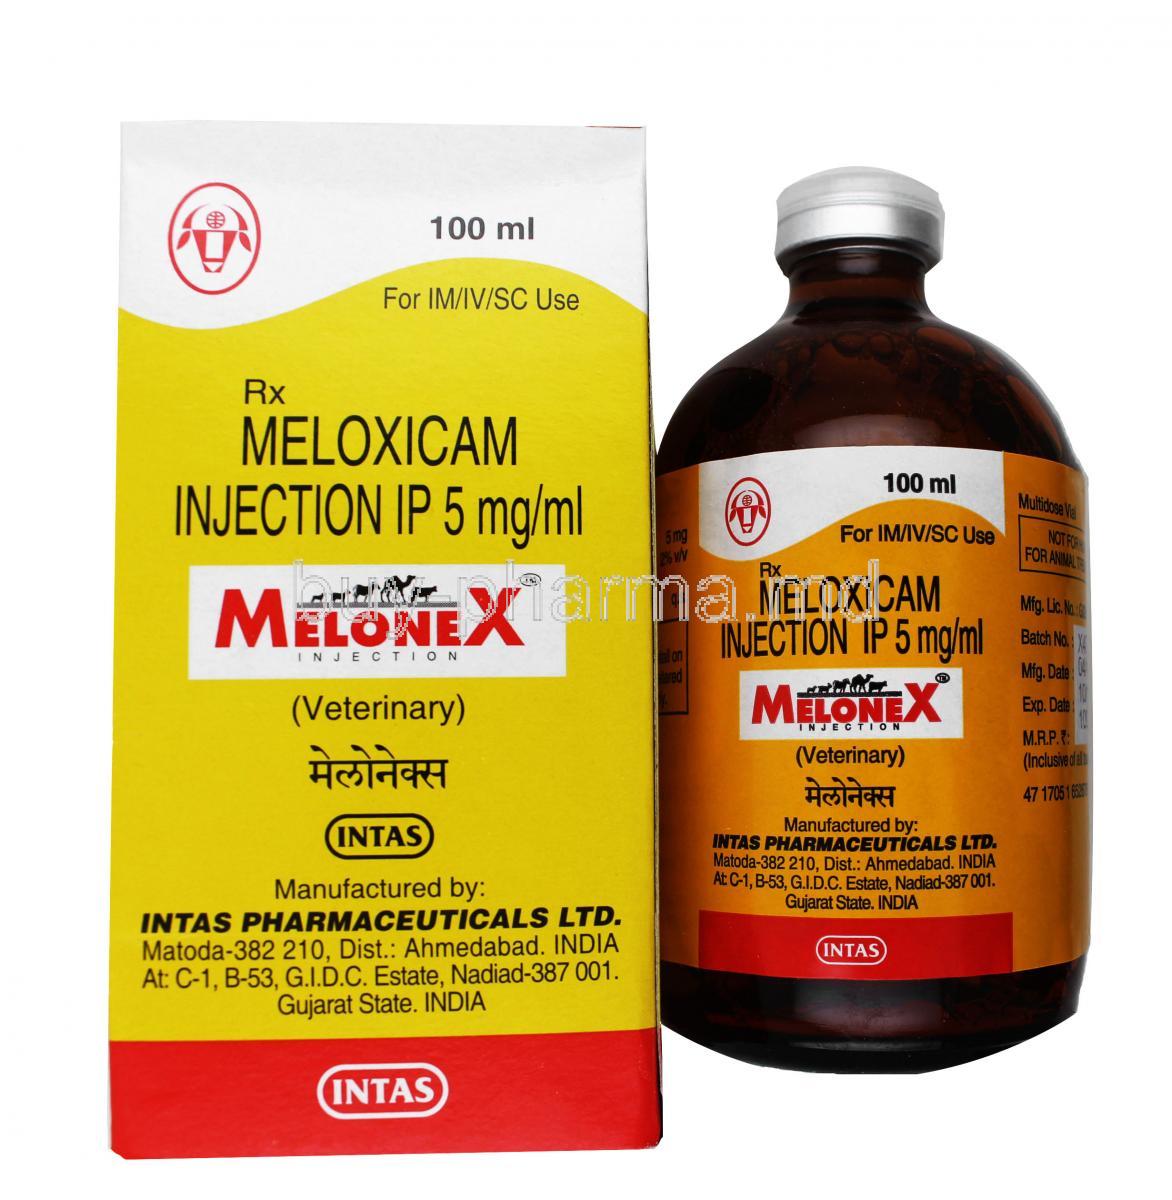 MELONEX Injection, Meloxicam , 100ml, box and bottle